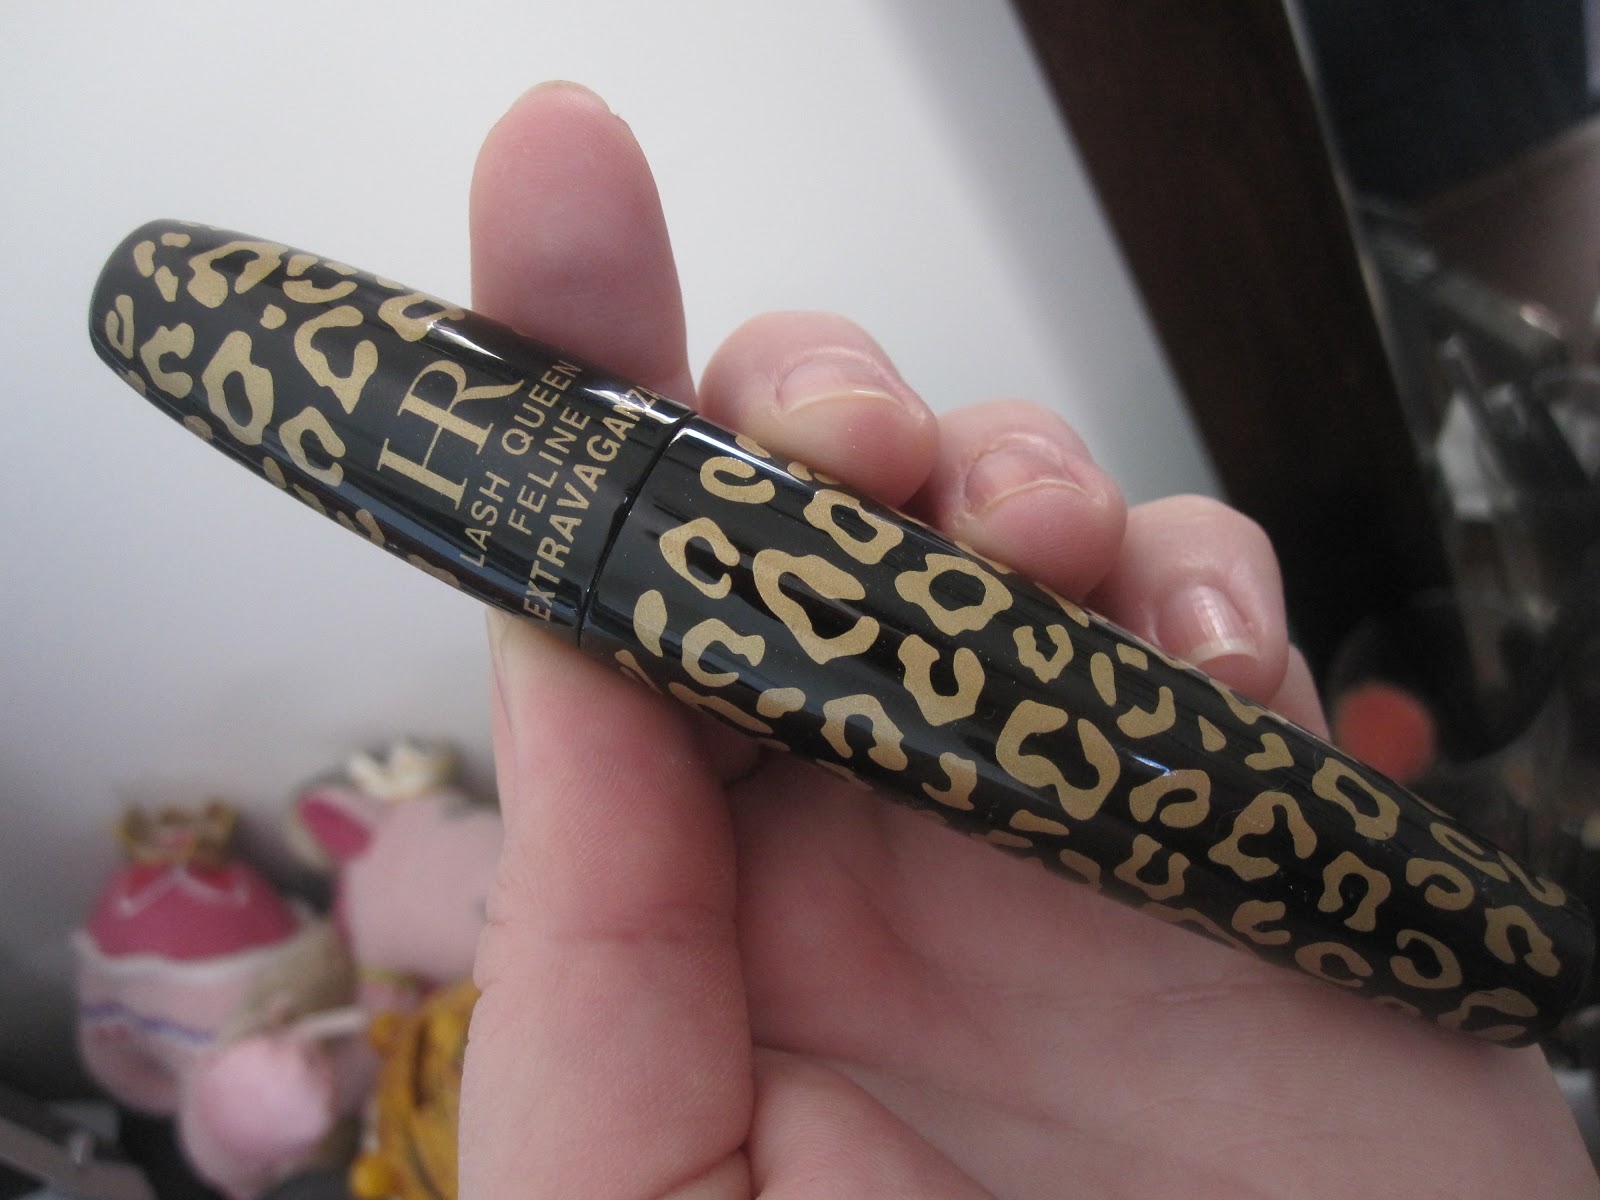 New mascara day-and my face is wearing today Expat Up Addict